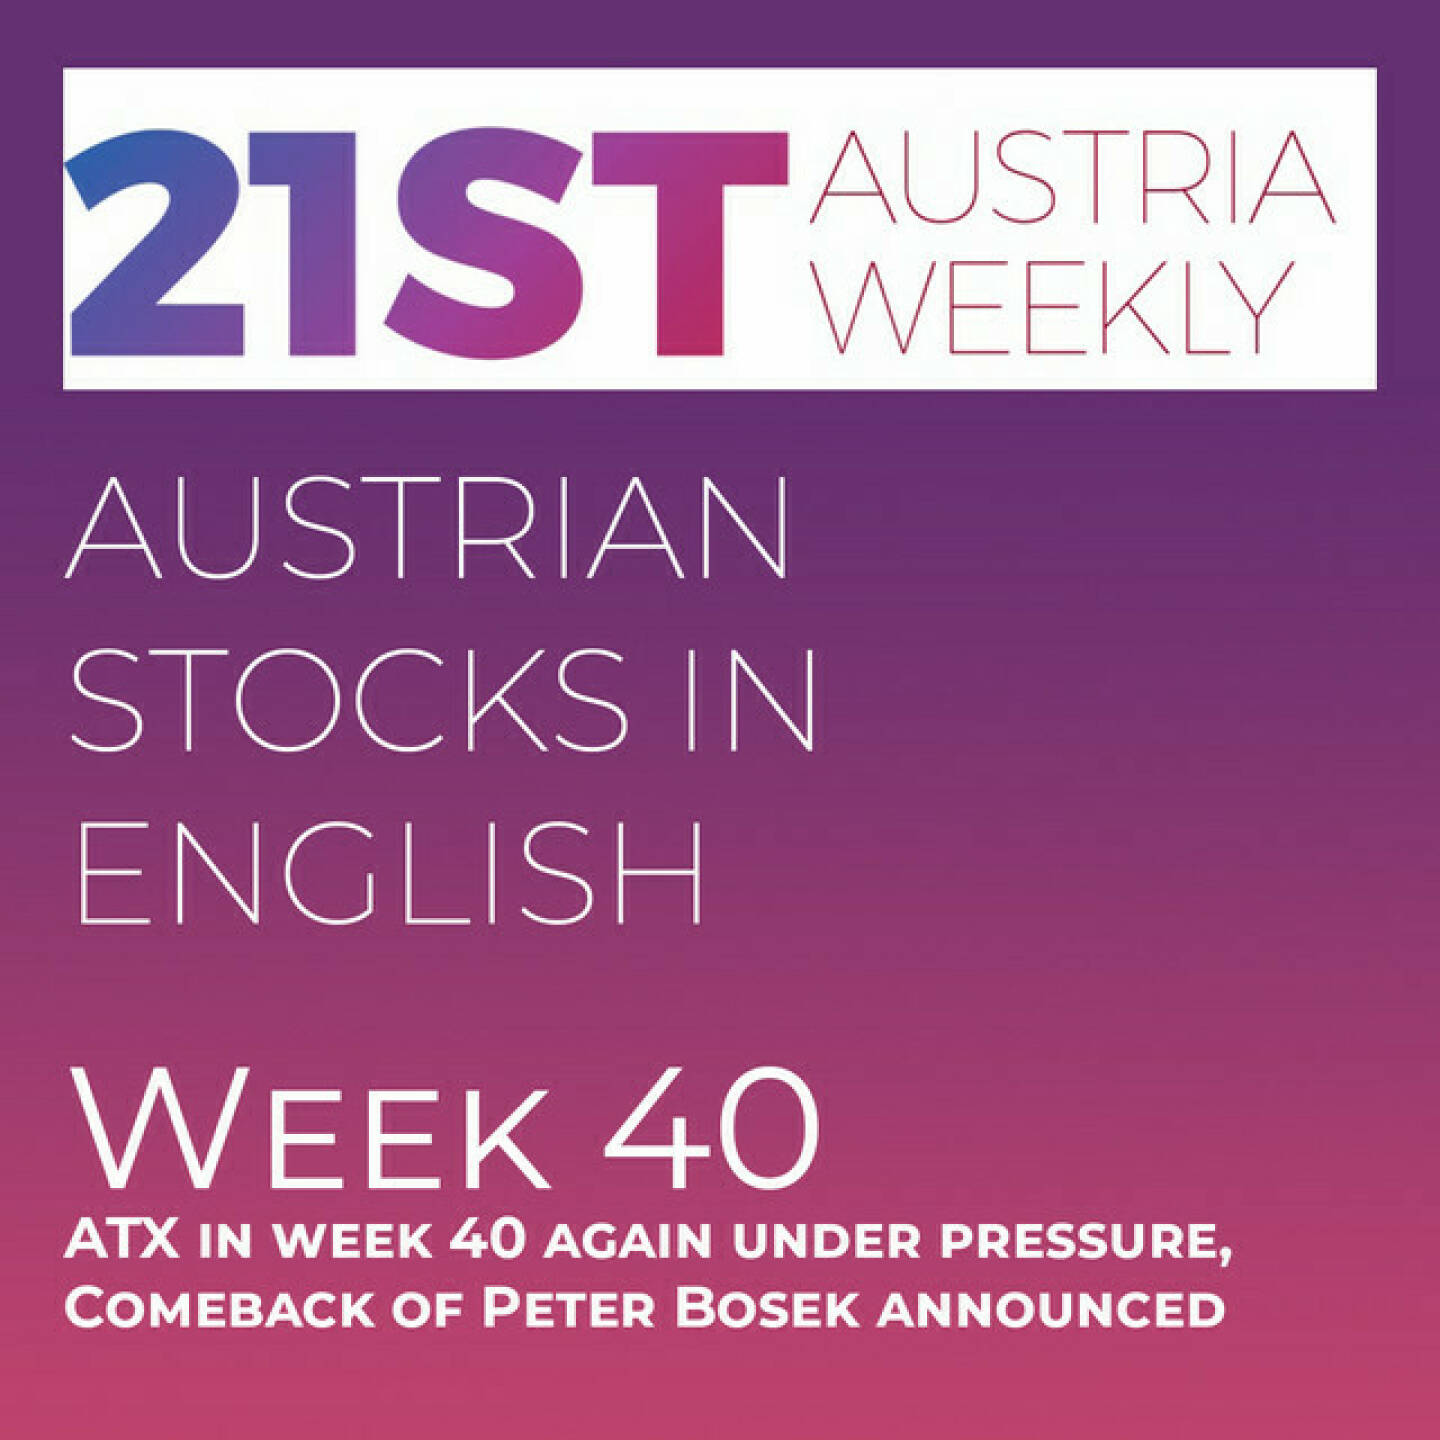 https://open.spotify.com/episode/2owuJ2tzWeLM7705aXKsuN
Austrian Stocks in English: ATX in week 40 again under pressure, Comeback of Peter Bosek announced - <p>Welcome  to &#34;Austrian Stocks in English - presented by Palfinger&#34;, the english spoken weekly Summary for the Austrian Stock Market,  positioned every Sunday in the mostly german languaged Podcast &#34;Audio-CD.at Indie Podcasts&#34;- Wiener Börse, Sport Musik und Mehr“ .<br/><br/>The following script ist based on our 21st Austria weekly and Week 40 was another red week for the Austrian Stock Market, ATX again fell under his starting value of the year.  News came from Strabag, RHI Magnesita, OMV, Frequentis, FACC, , Erste Group (Peter Bosek), Andritz and Immofinanz, spoken by the absolutely smart Alison. <br/><br/><a href=https://boerse-social.com/21staustria target=_blank>https://boerse-social.com/21staustria</a><br/><br/>Please rate my Podcast on Apple Podcasts (or Spotify): <a href=https://podcasts.apple.com/at/podcast/audio-cd-at-indie-podcasts-wiener-boerse-sport-musik-und-mehr/id1484919130 target=_blank>https://podcasts.apple.com/at/podcast/audio-cd-at-indie-podcasts-wiener-boerse-sport-musik-und-mehr/id1484919130</a> .And please spread the word : <a href=https://www.boerse-social.com/21staustria target=_blank>https://www.boerse-social.com/21staustria</a> - the address to subscribe to the weekly summary as a PDF.</p>